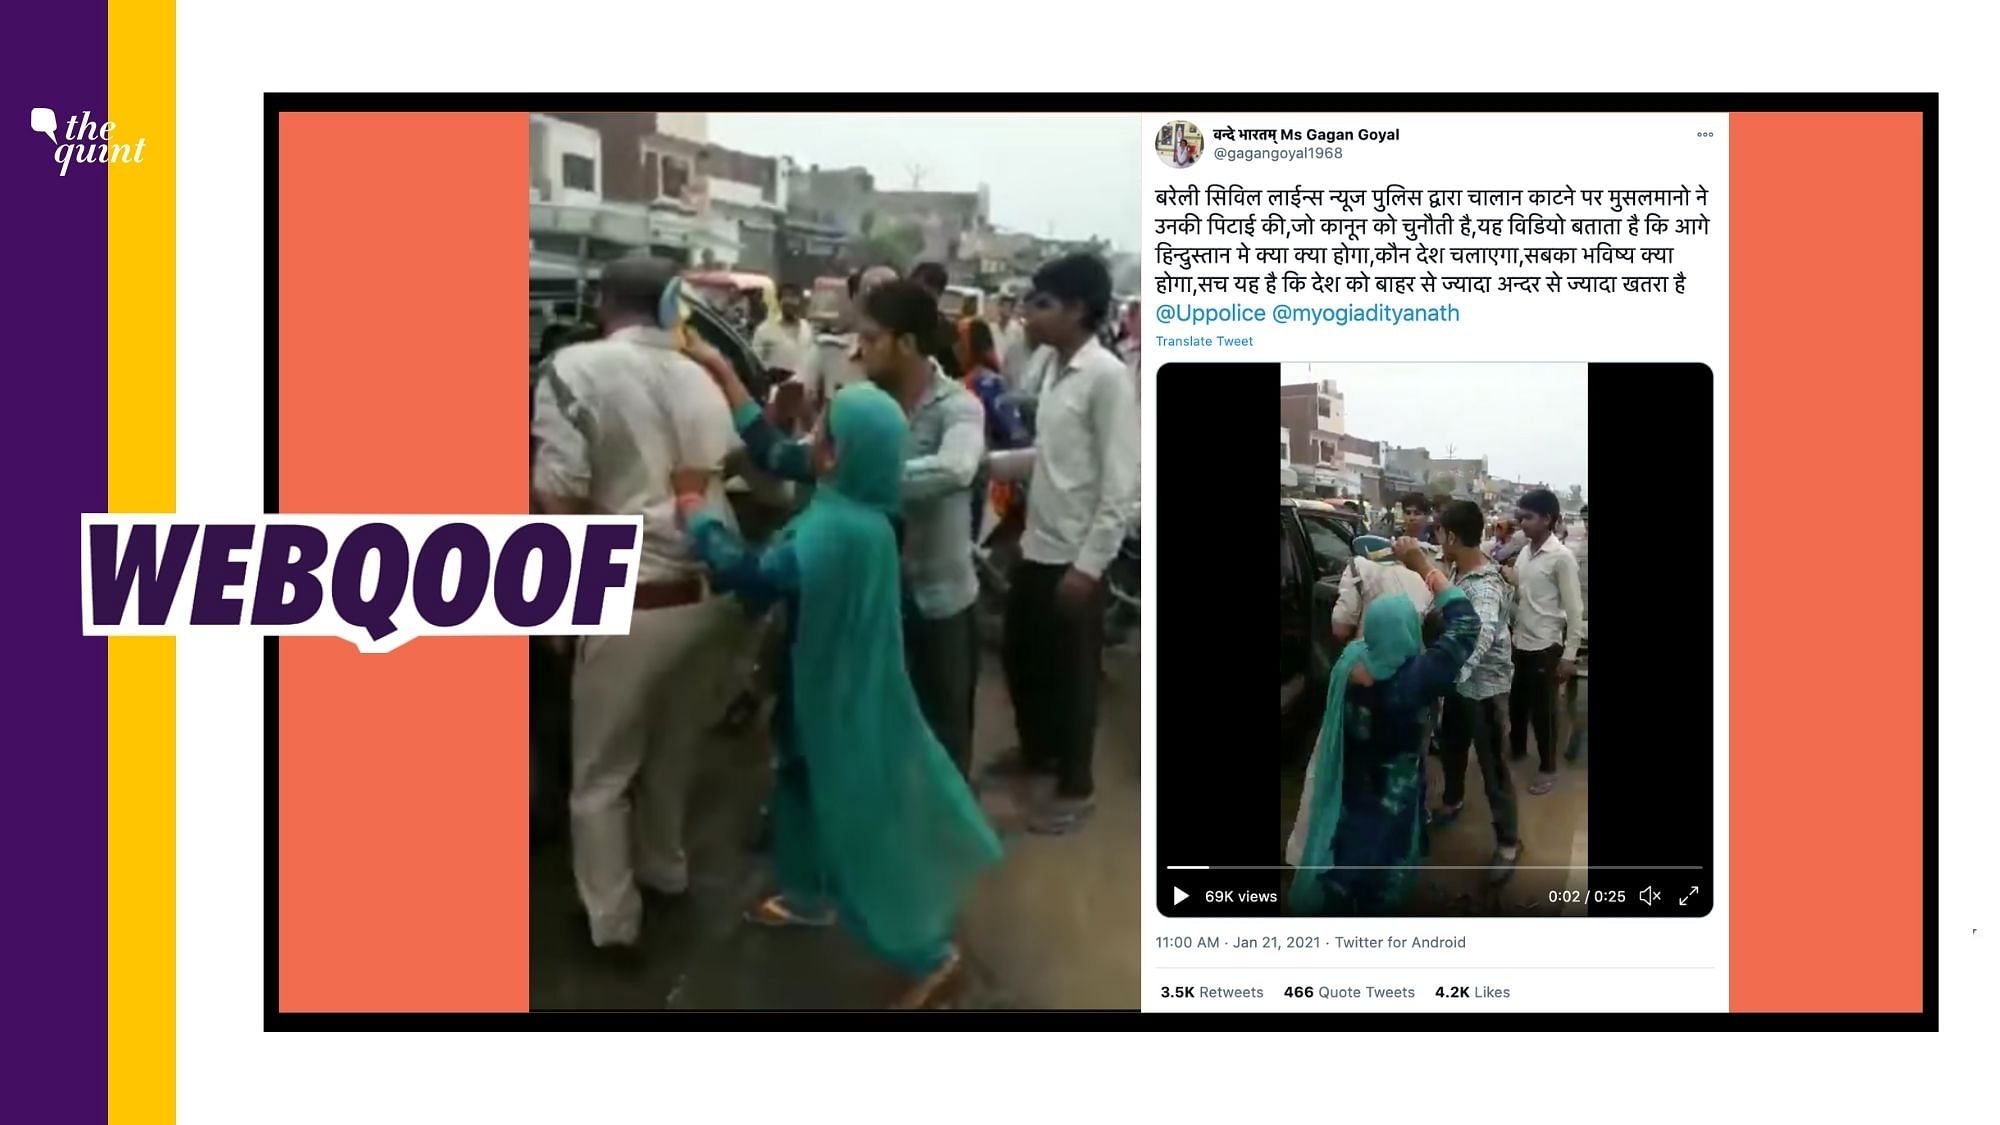 Social media users revived a video of an incident which dates back to 2018 and falsely claimed that it’s from Uttar Pradesh’s Bareilly.